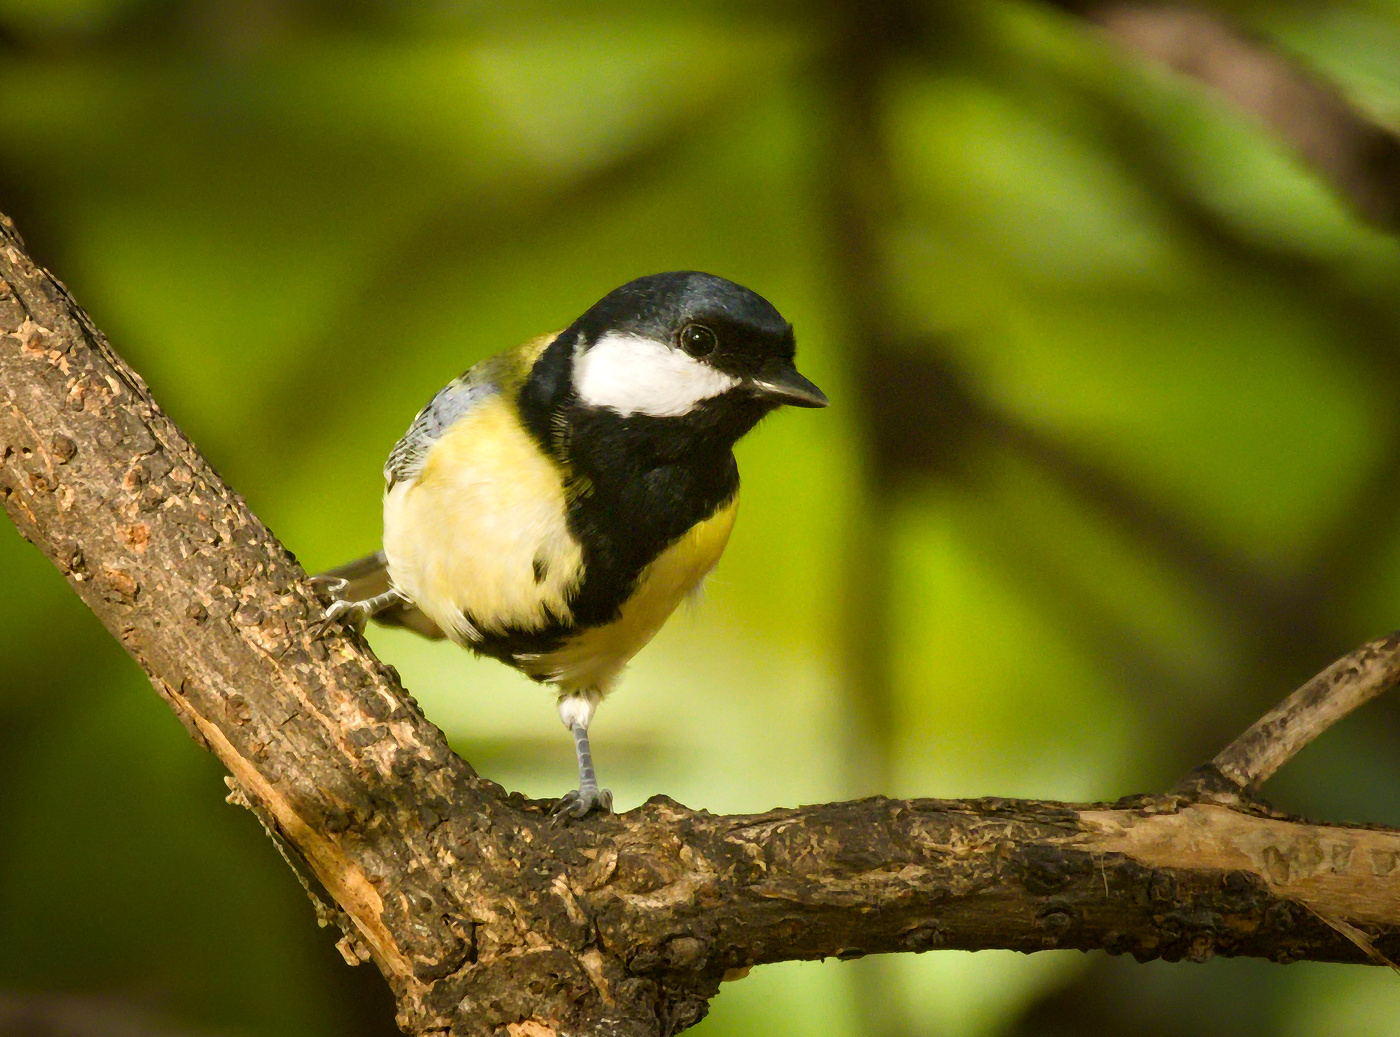 The Great Tit (Parus Major) Or Titmouse Is A Widespread And Common Species  Throughout Europe, The Middle East, Central And Northern Asia, And Parts Of  North Africa In Any Sort Of Woodland.